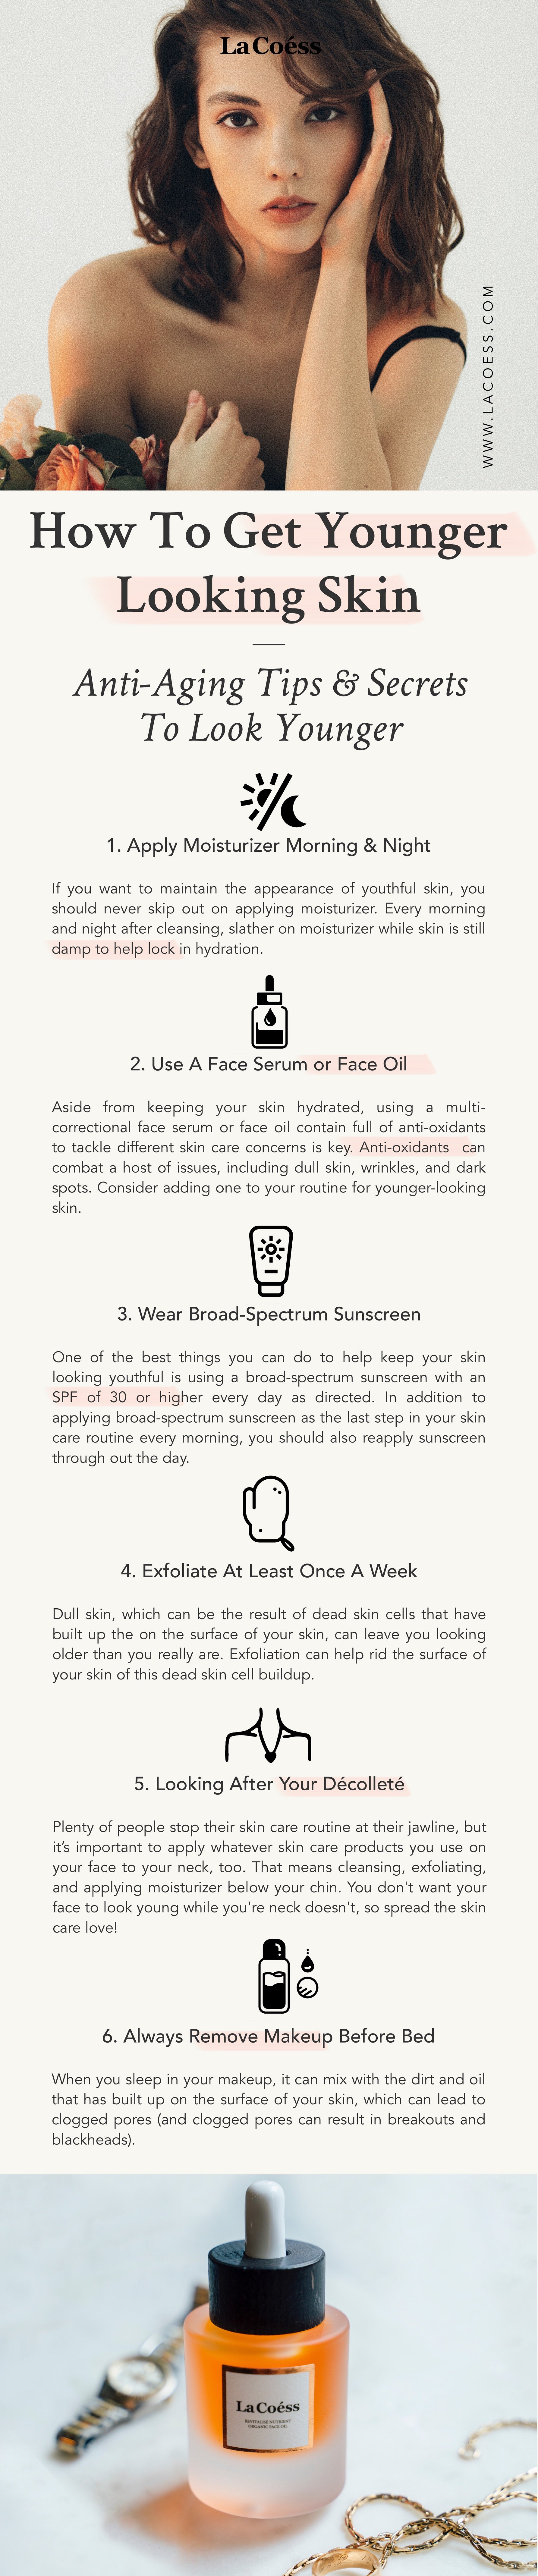 La Coéss tips how to get younger looking skin